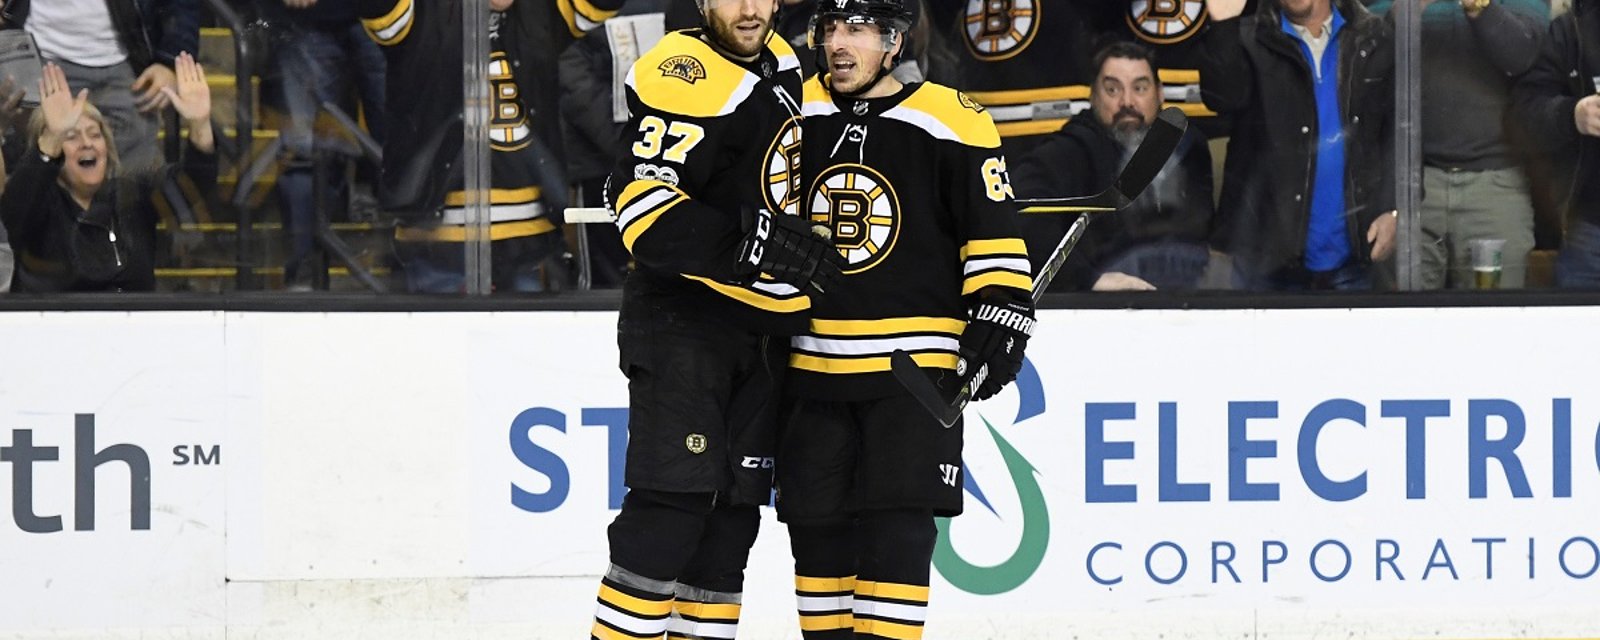 Bad news for Bergeron &amp;amp; Marchand ahead of big game against the Habs.